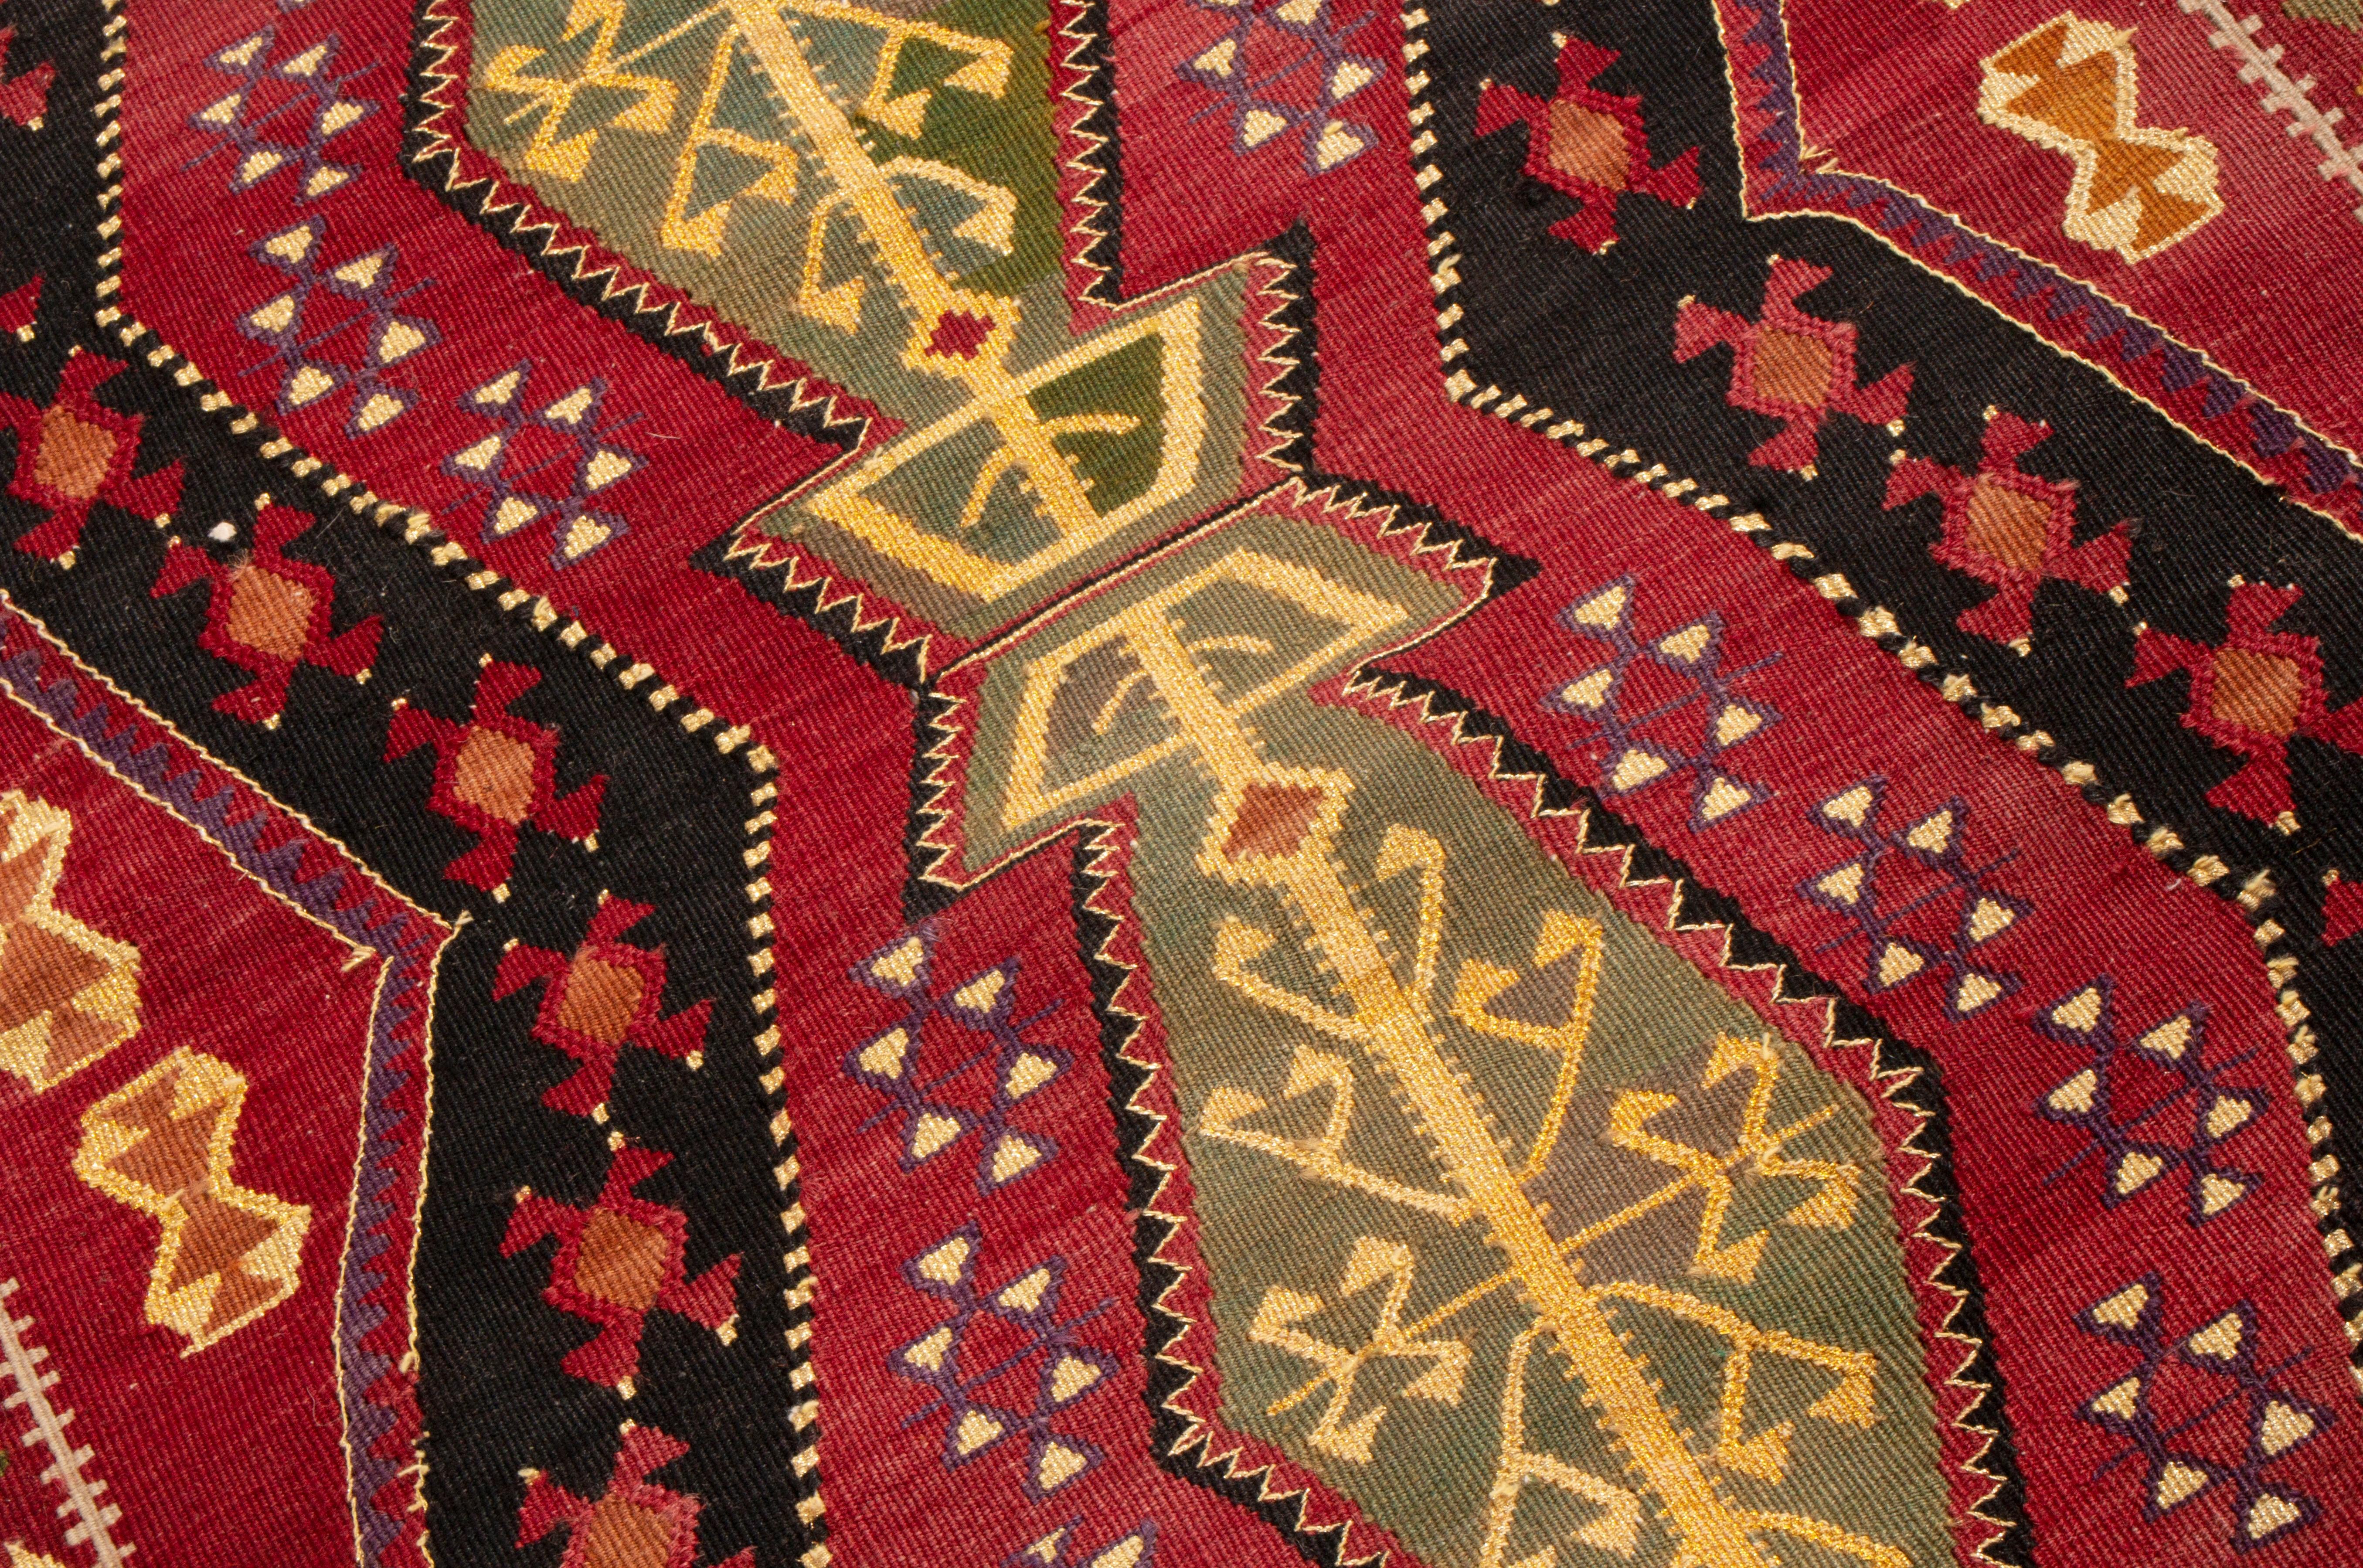 Hand-Knotted Antique Traditional Turkish Red and Gold Wool Kilim Rug